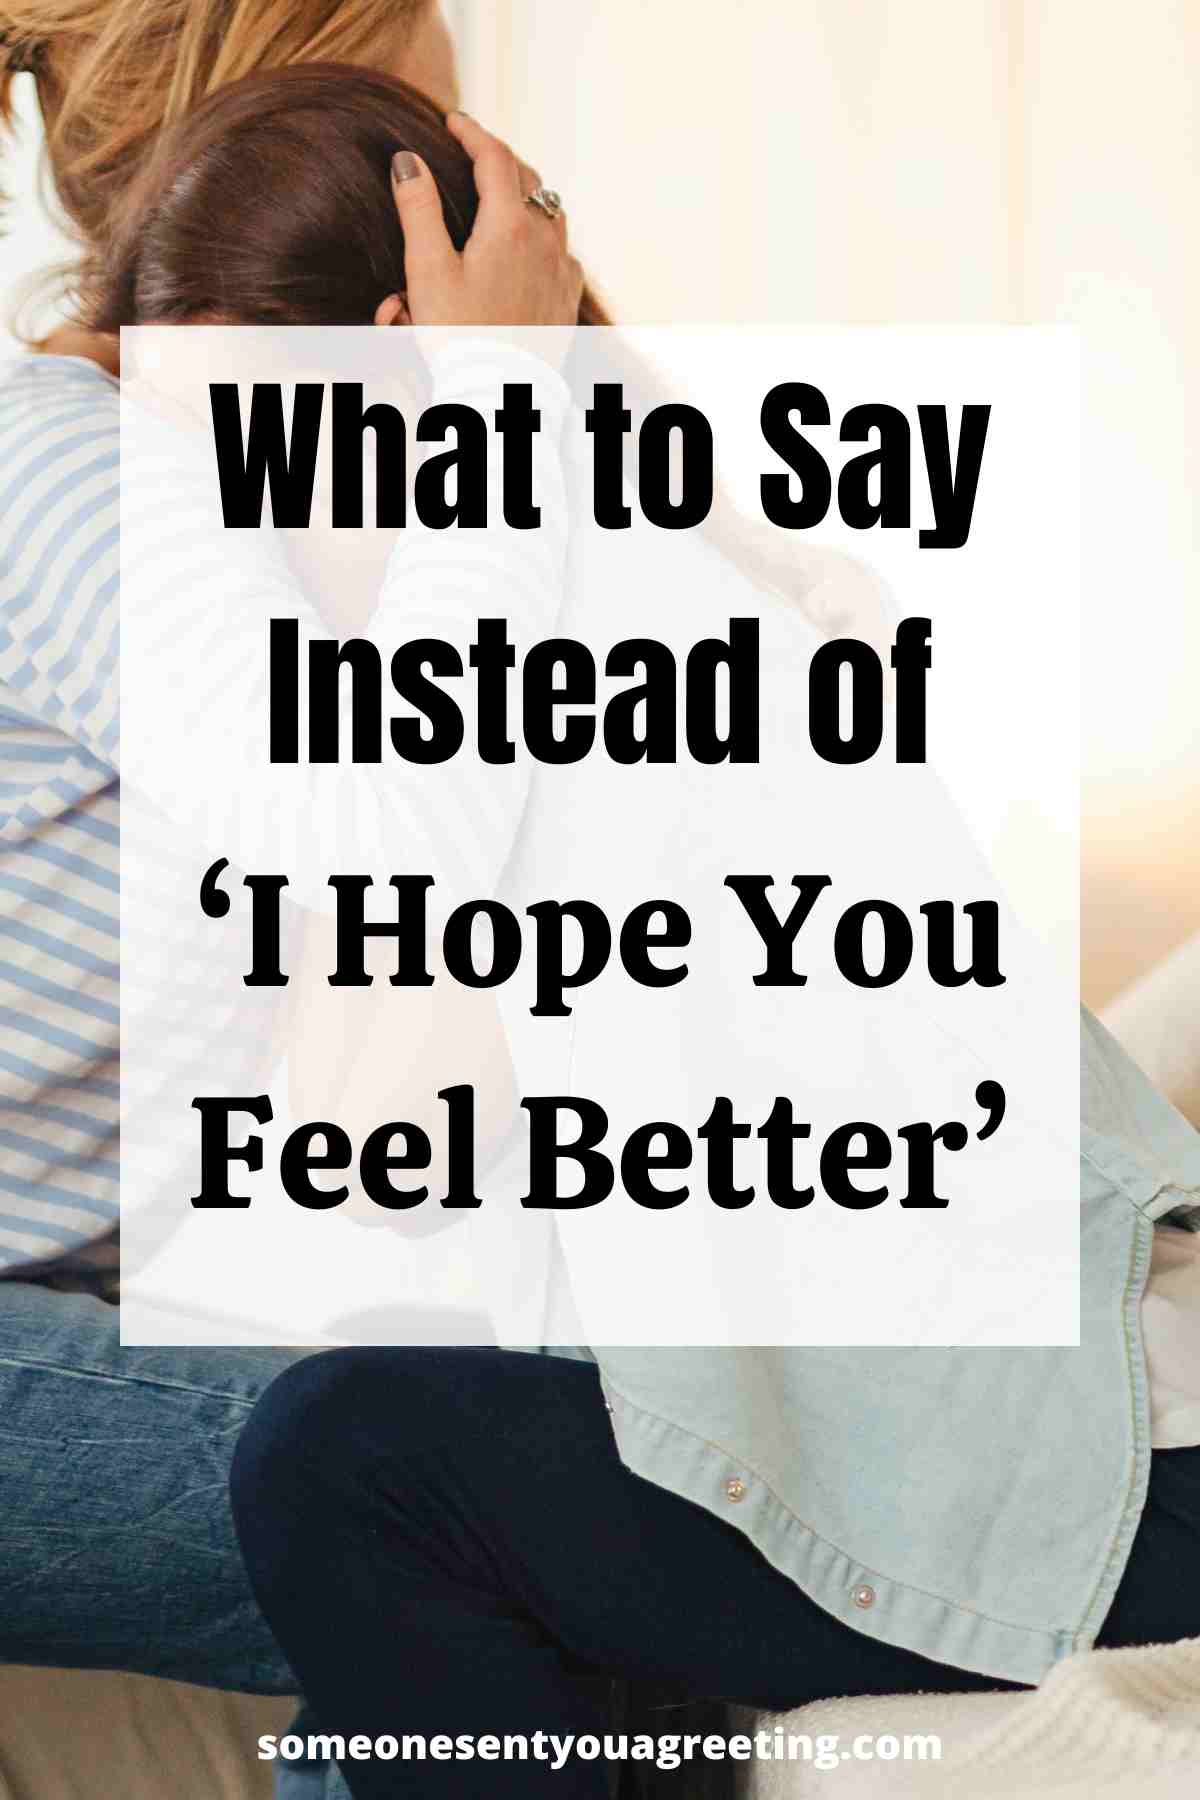 What to say instead of I hope you feel better